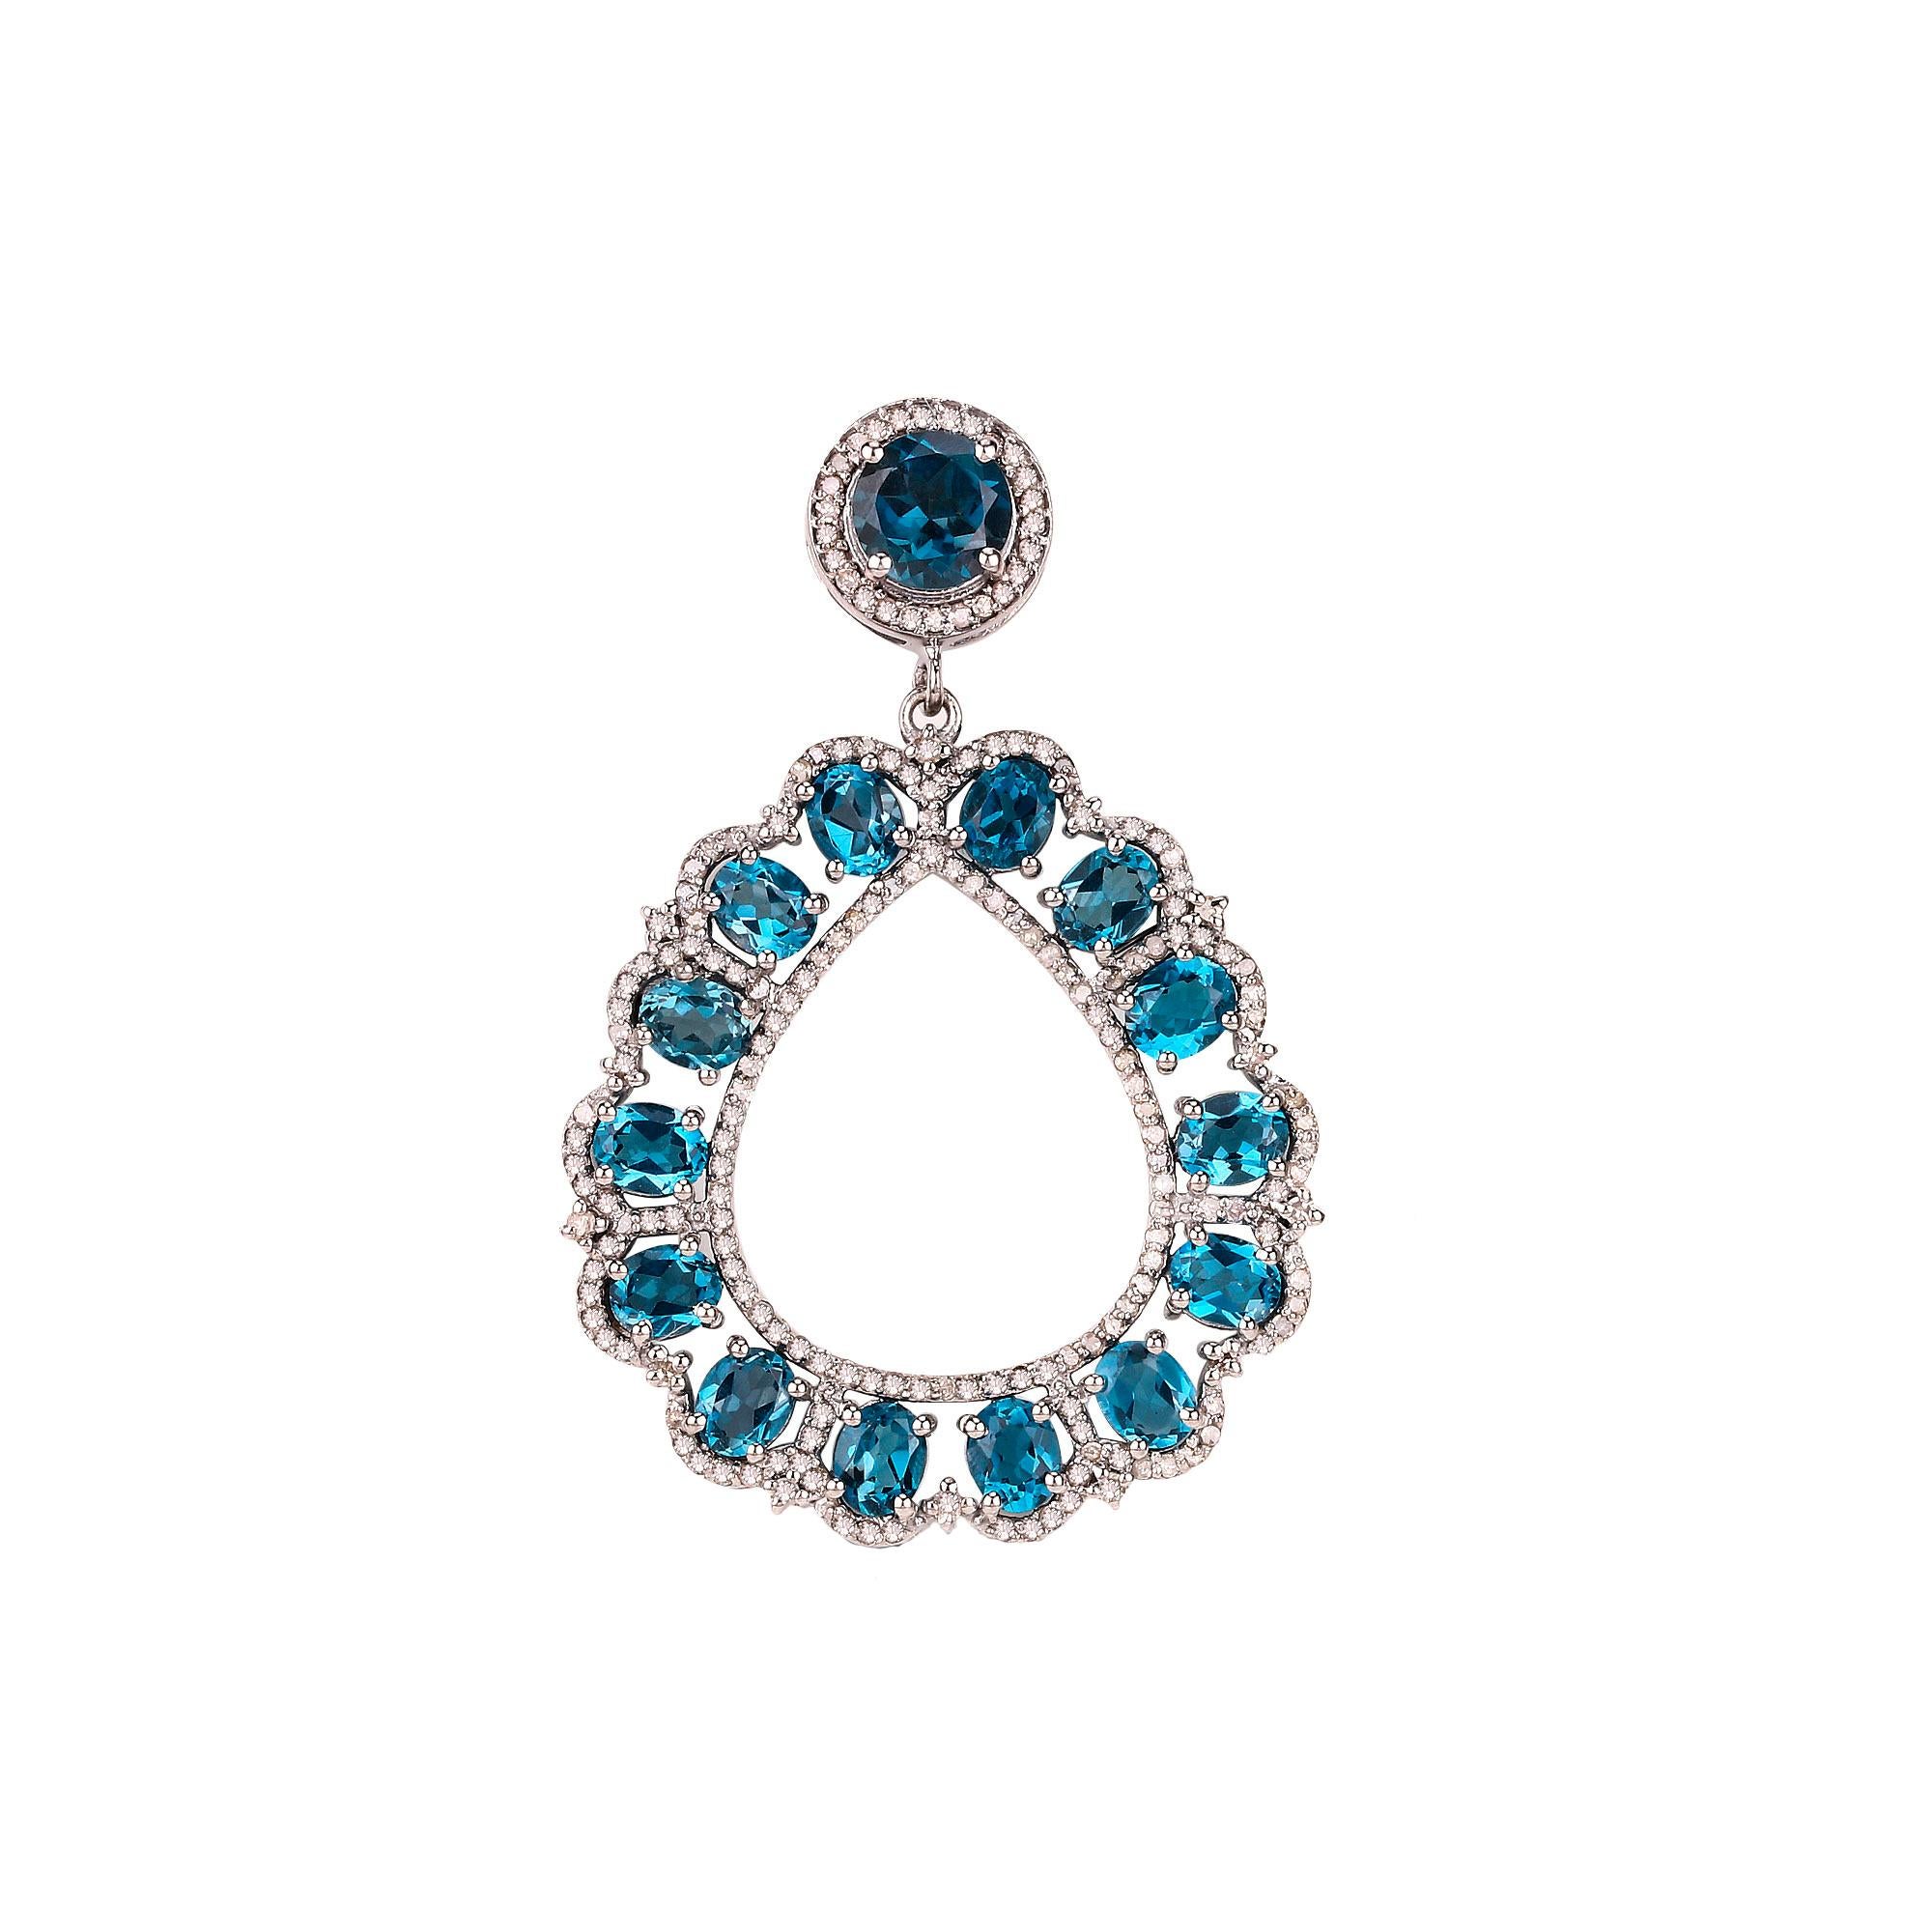 Mixed Cut London Blue Topaz Dangle Earrings With Diamonds 15.52 Carats Sterling Silver For Sale